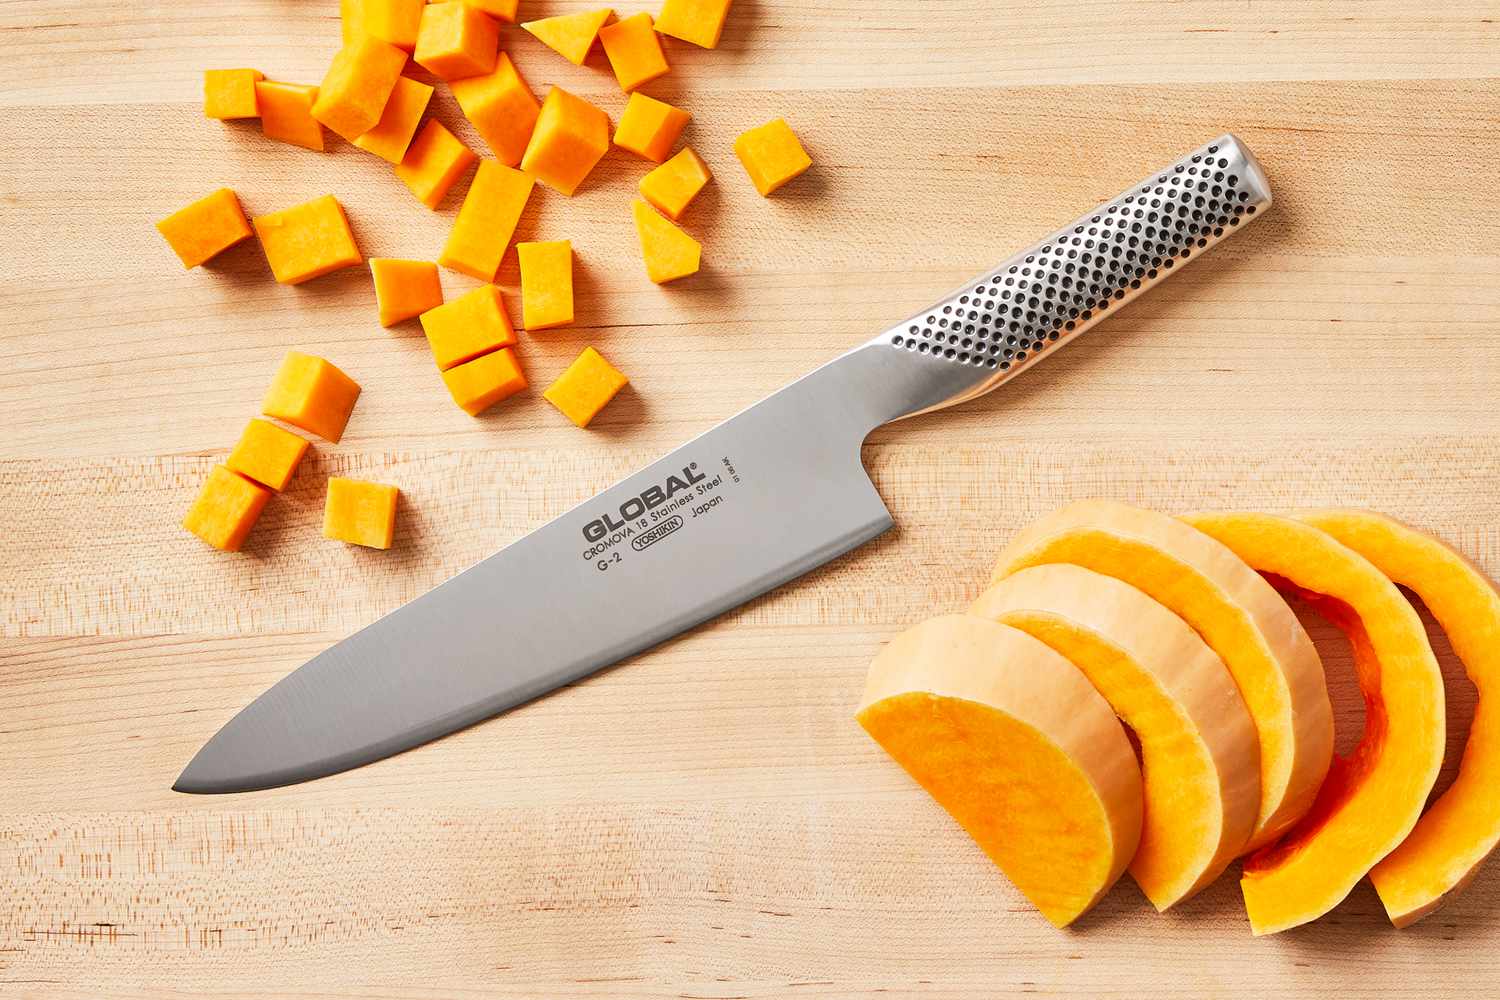 Global 8-Inch Chef's Knife on a wooden cutting board with sliced and diced butternut squash